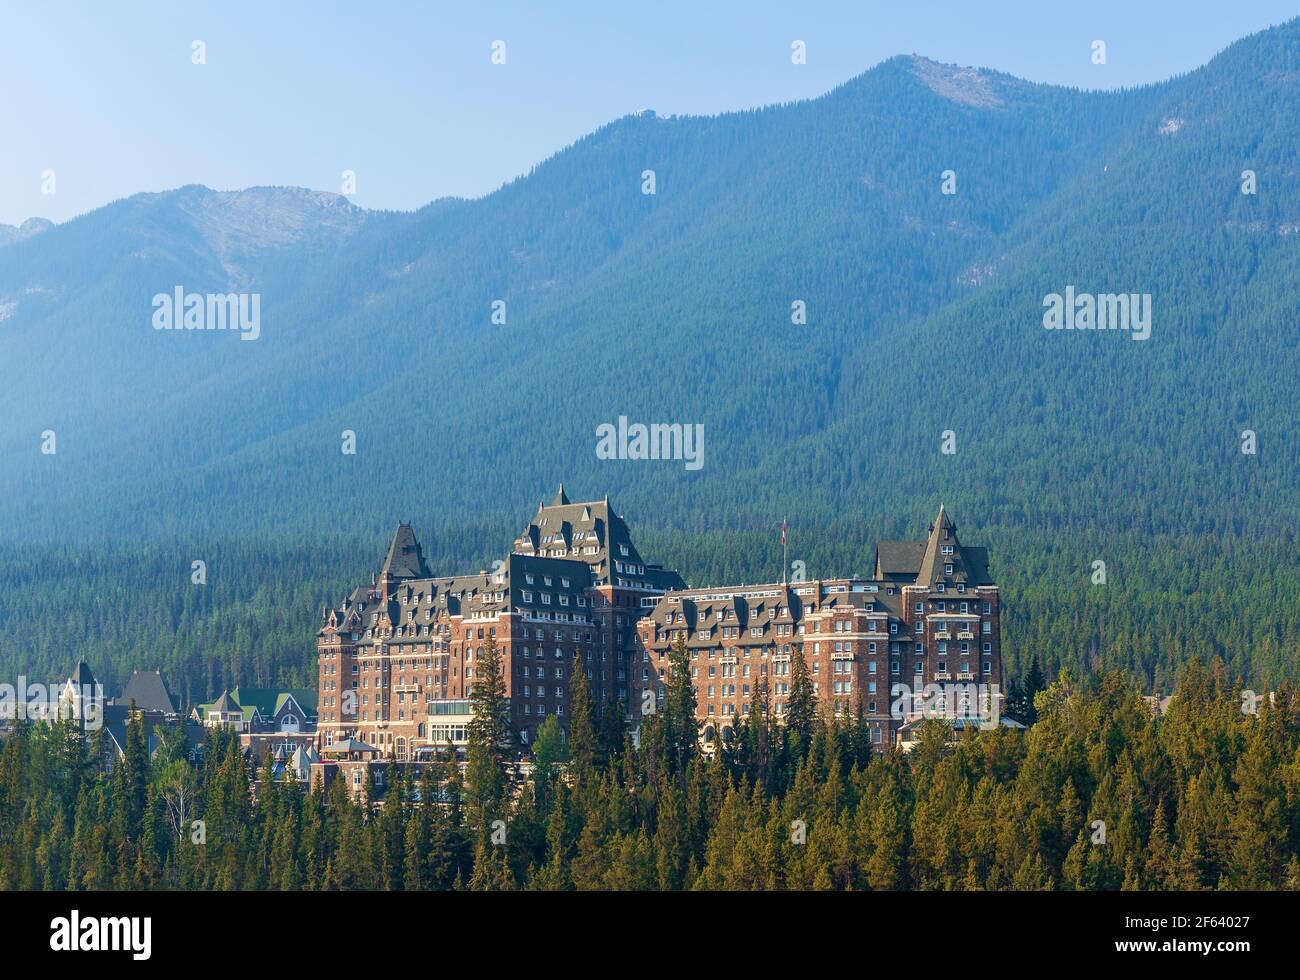 Landscape of pine tree forest with Banff Springs Hotel facade, Banff national park, Alberta, Canada. Stock Photo